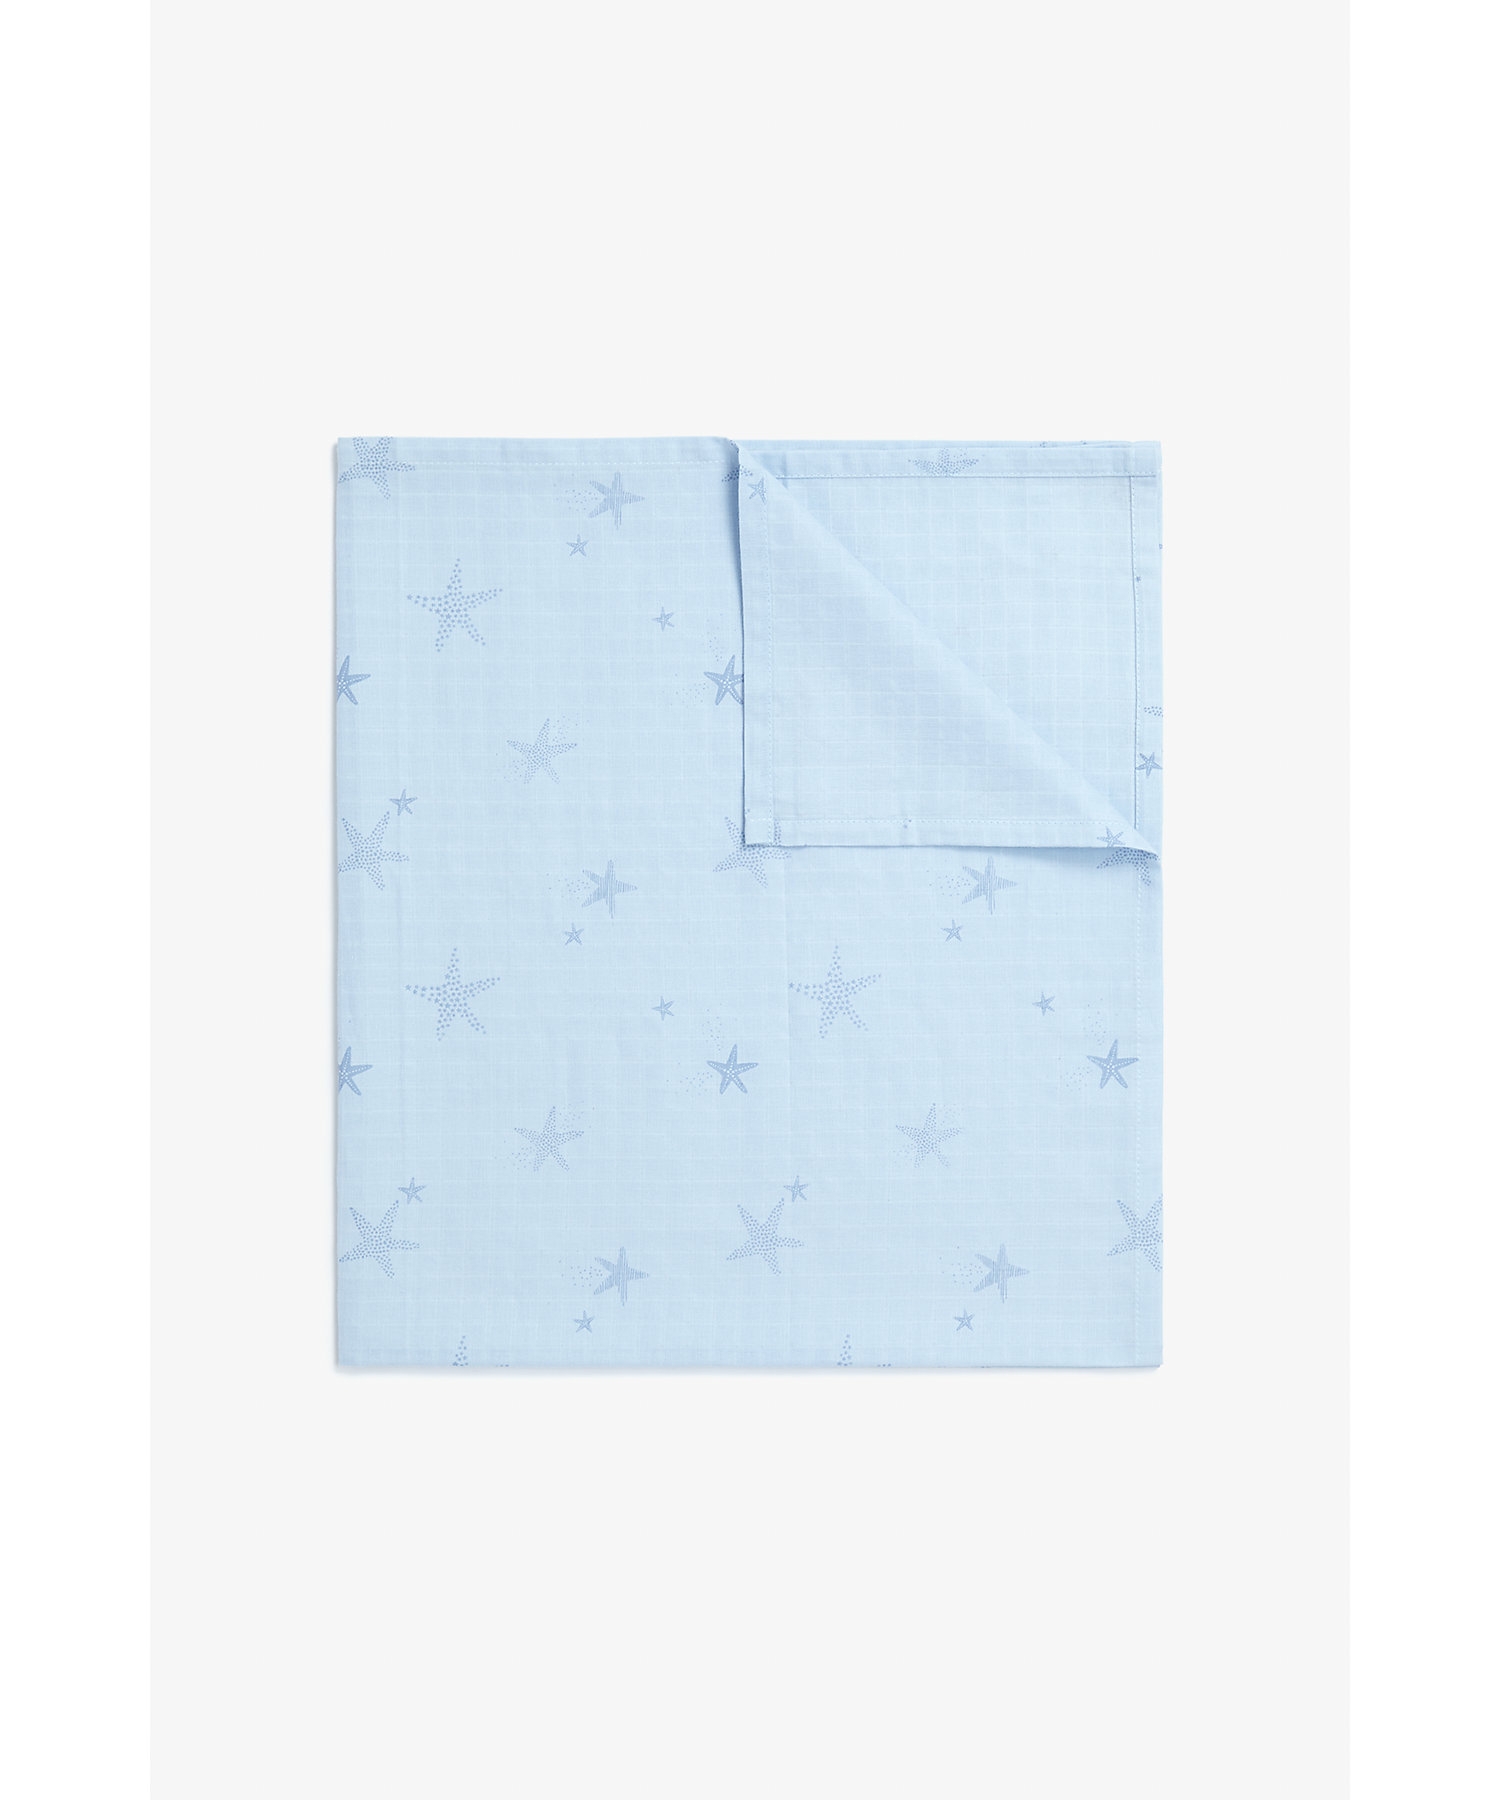 Mothercare | Mothercare You Me & The Sea Pack of 2 X-Large Muslins Blue 1